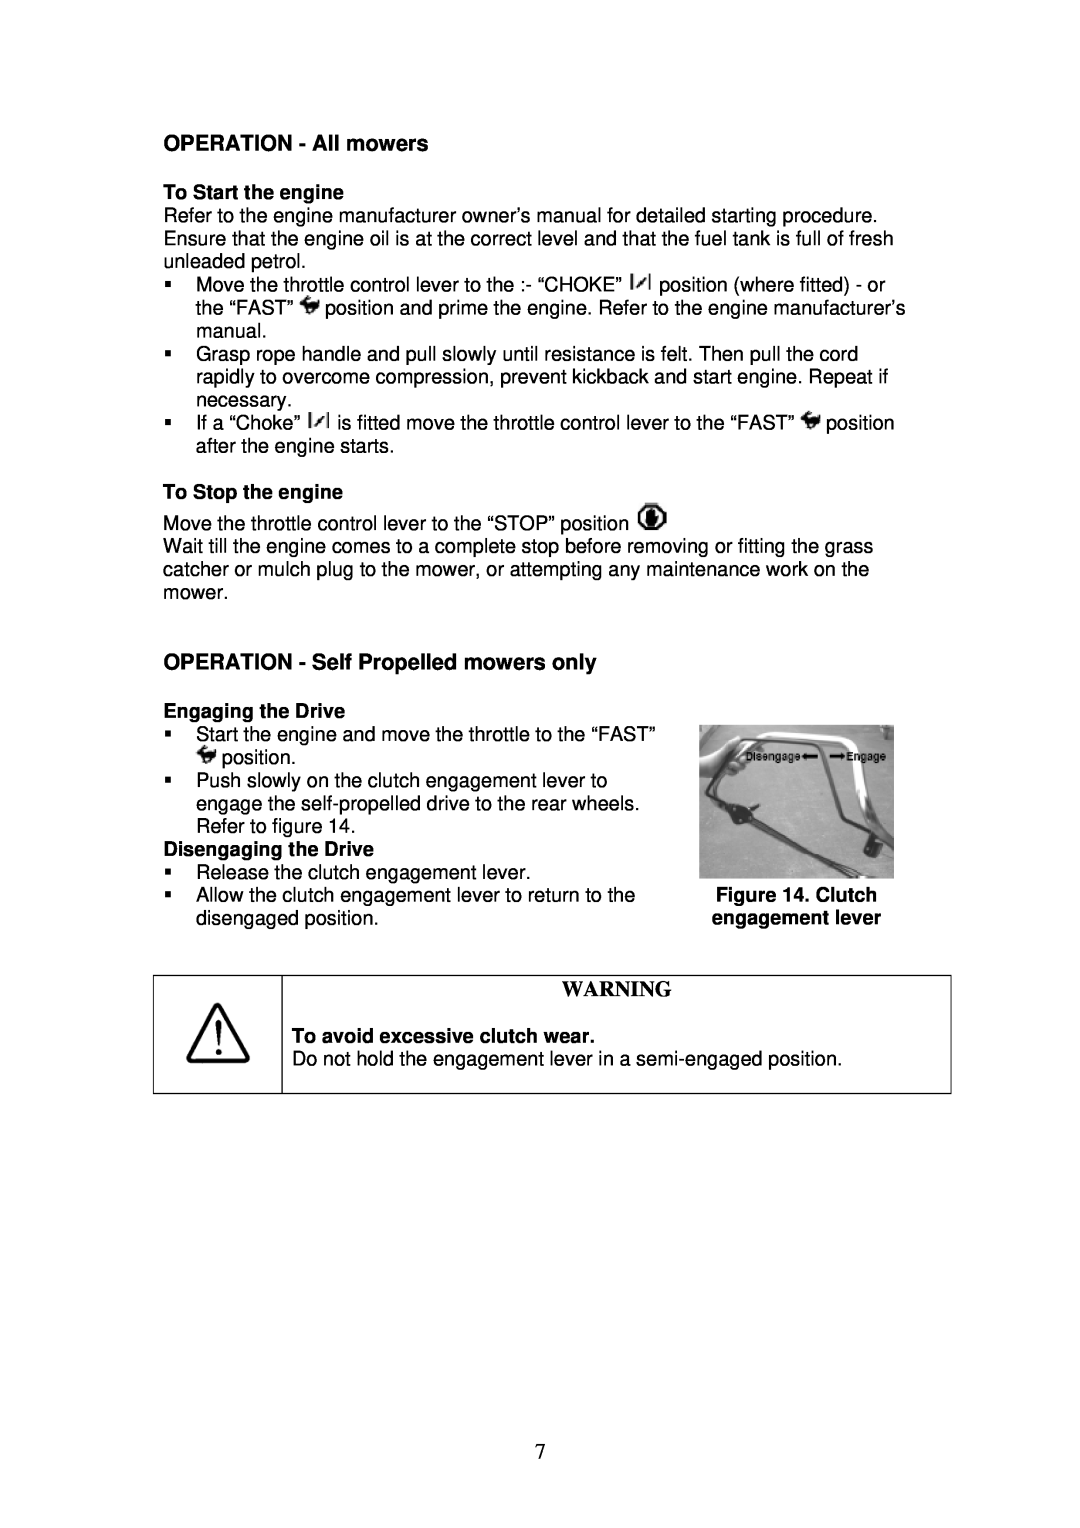 Rover 460 owner manual OPERATION - Self Propelled mowers only, To Start the engine, To Stop the engine, Engaging the Drive 